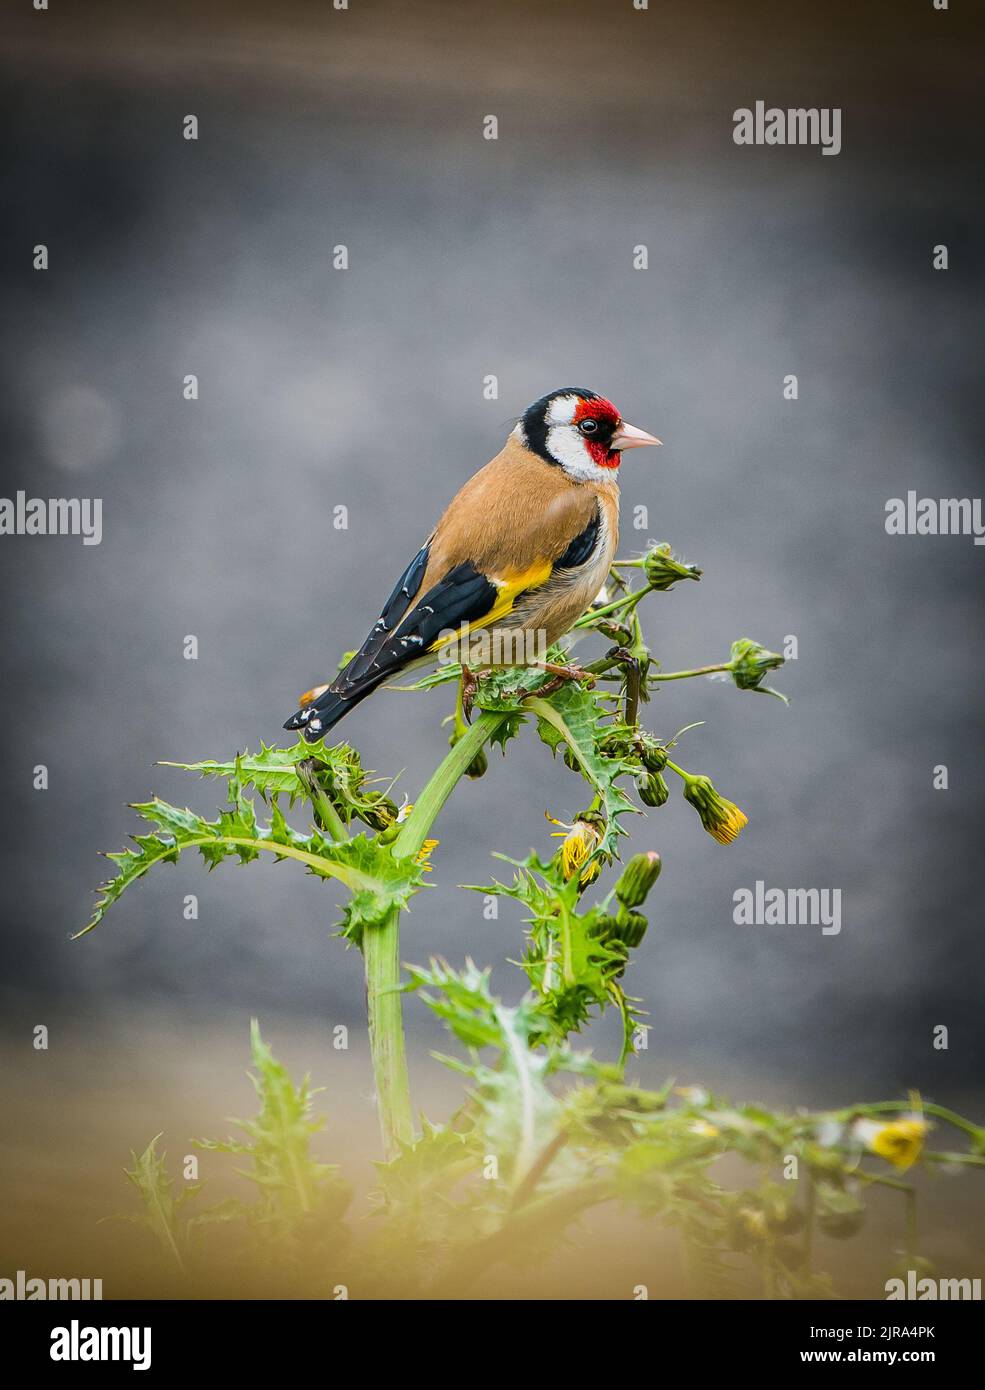 A Goldfinch on a Thistle, Arnside, Milnthorpe, Cumbria, Royaume-Uni Banque D'Images